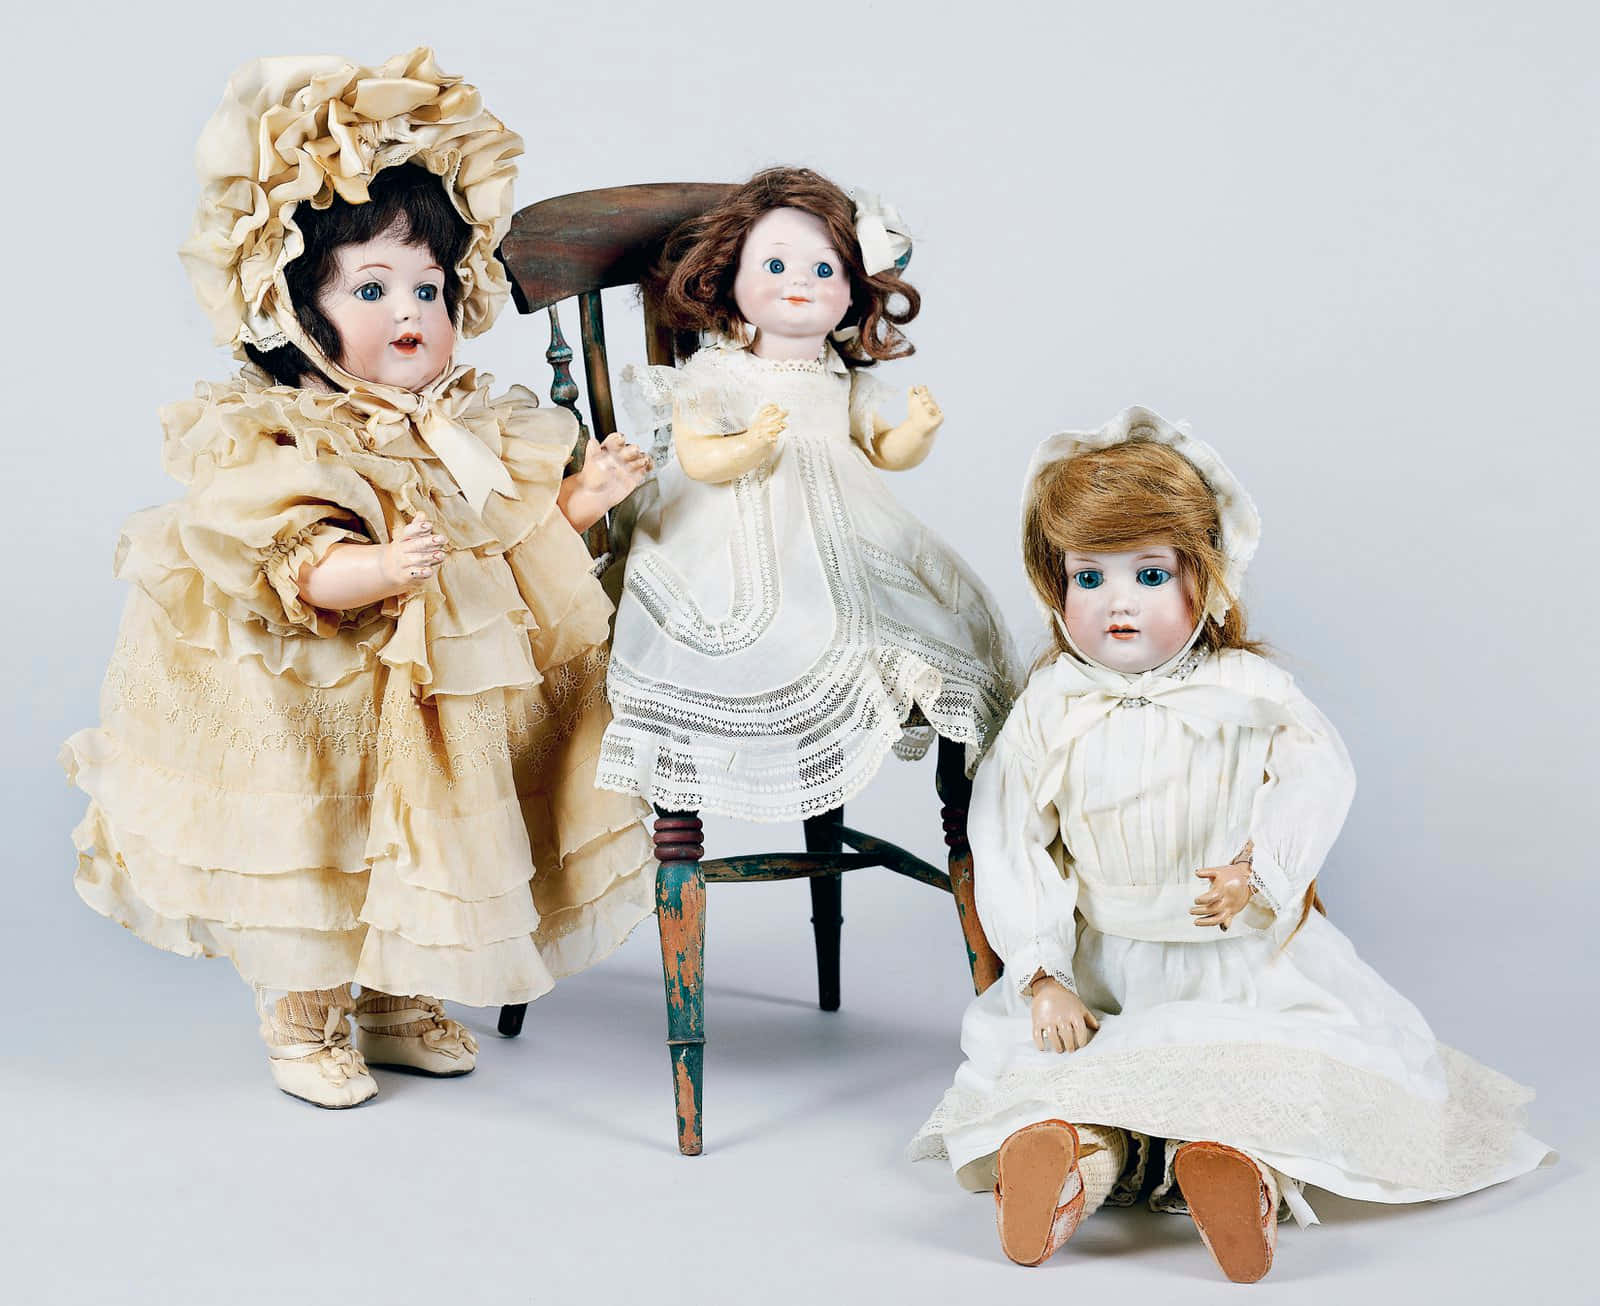 A collection of variously dressed dolls